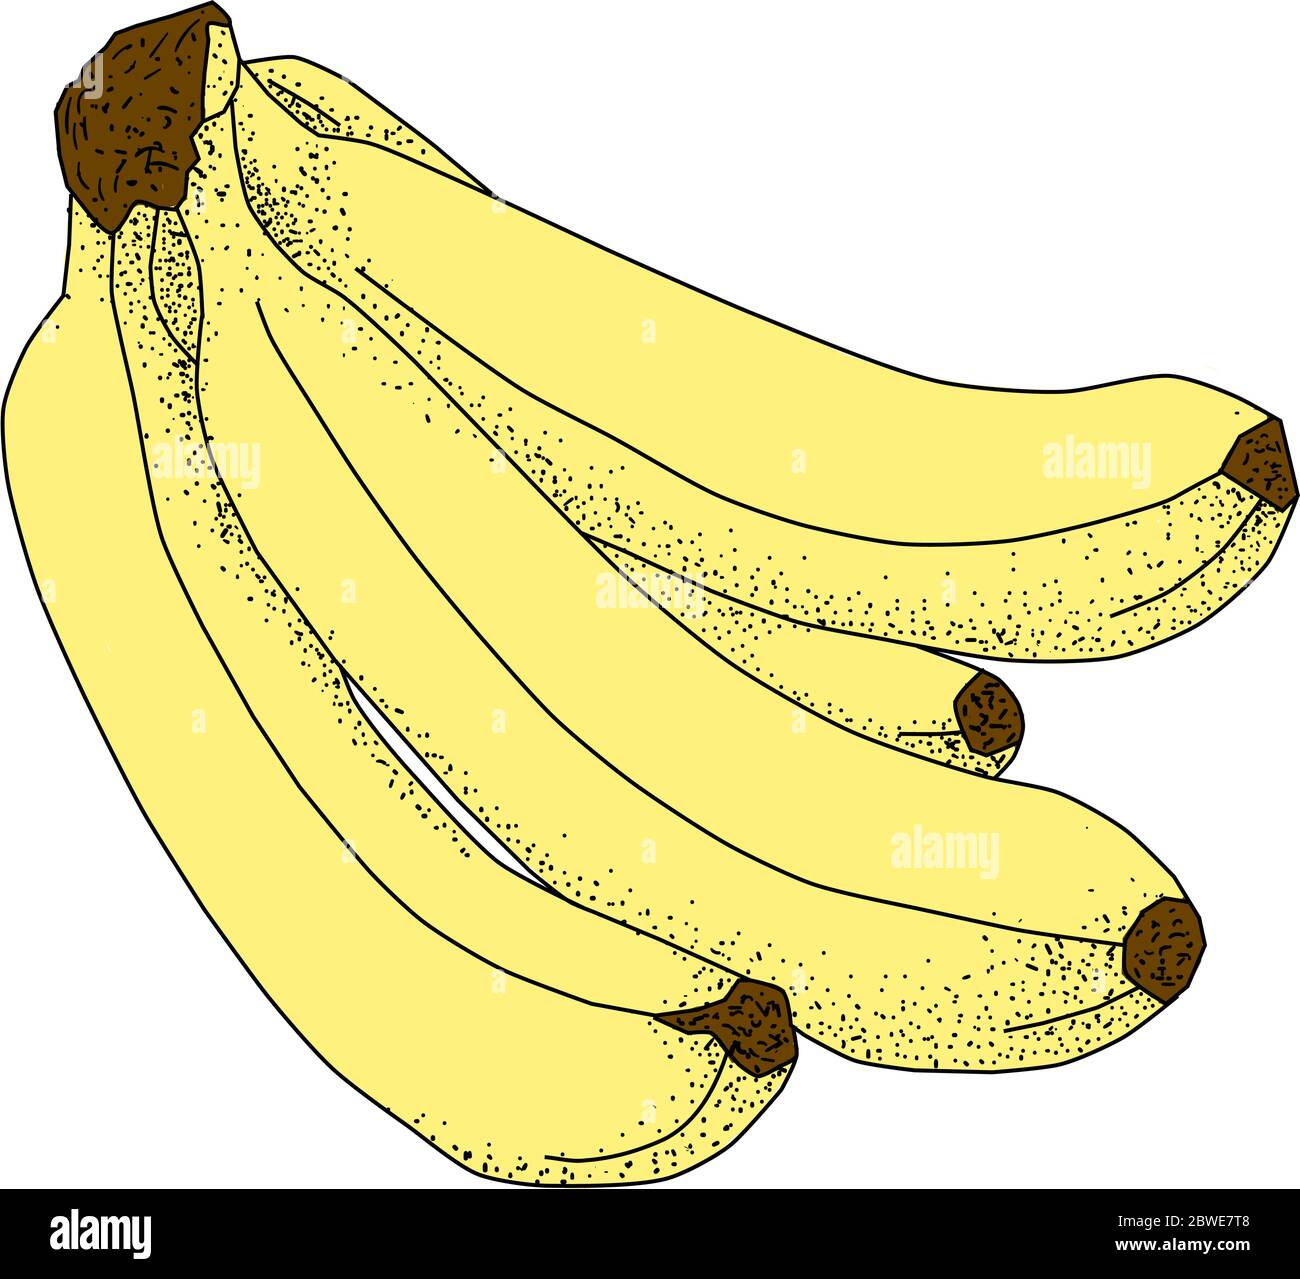 How to Draw a Banana - With the Skin and Peeled